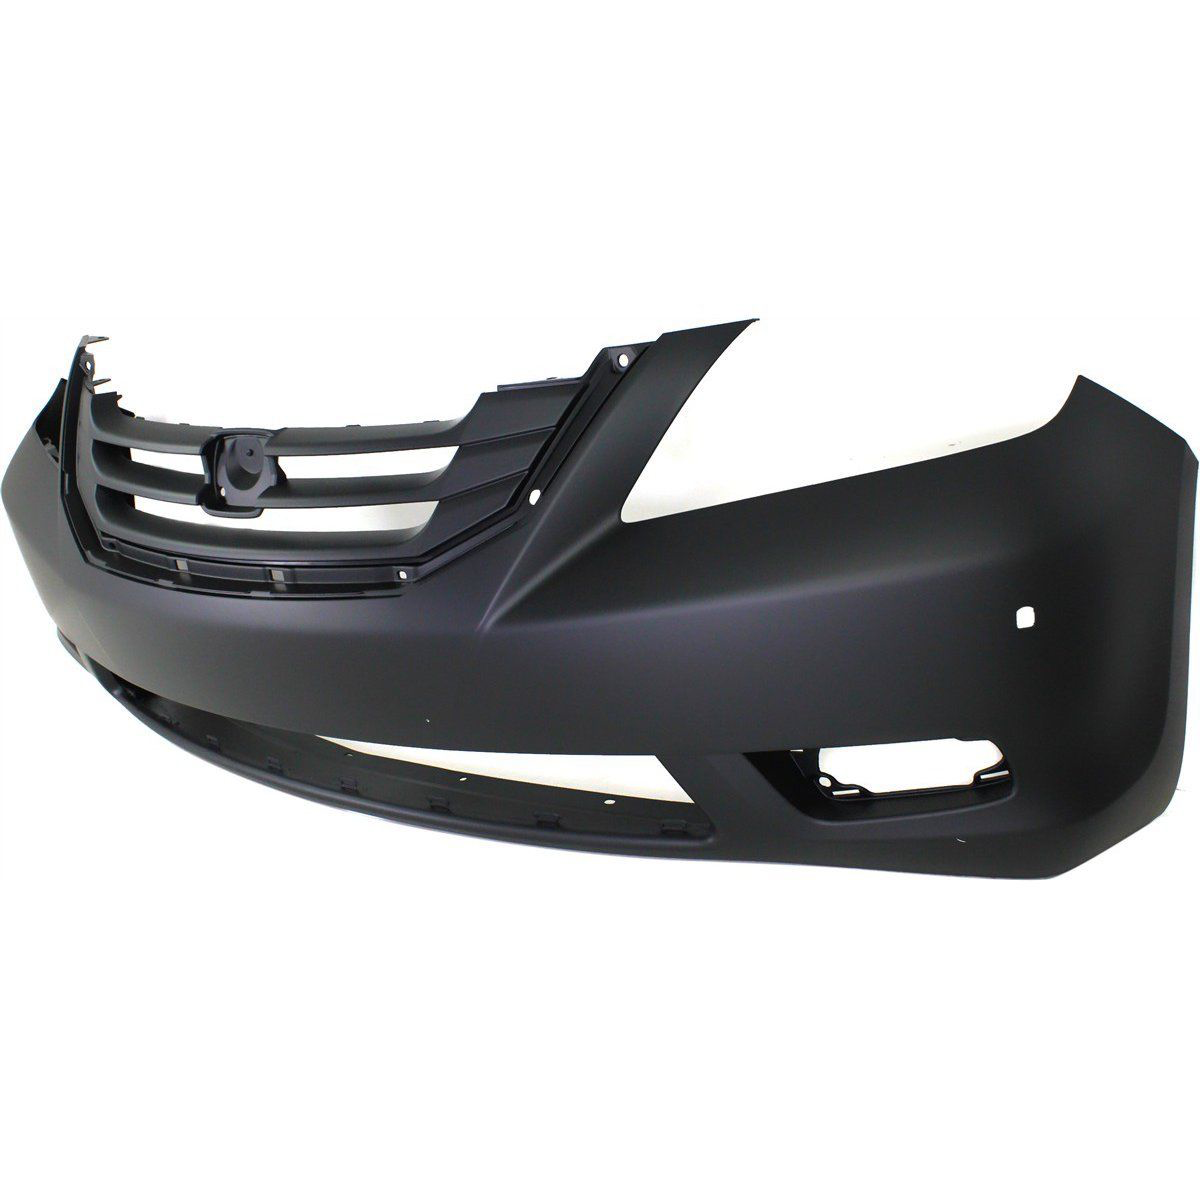 2008-2010 HONDA ODYSSEY Front Bumper Cover Touring Model Painted to Match